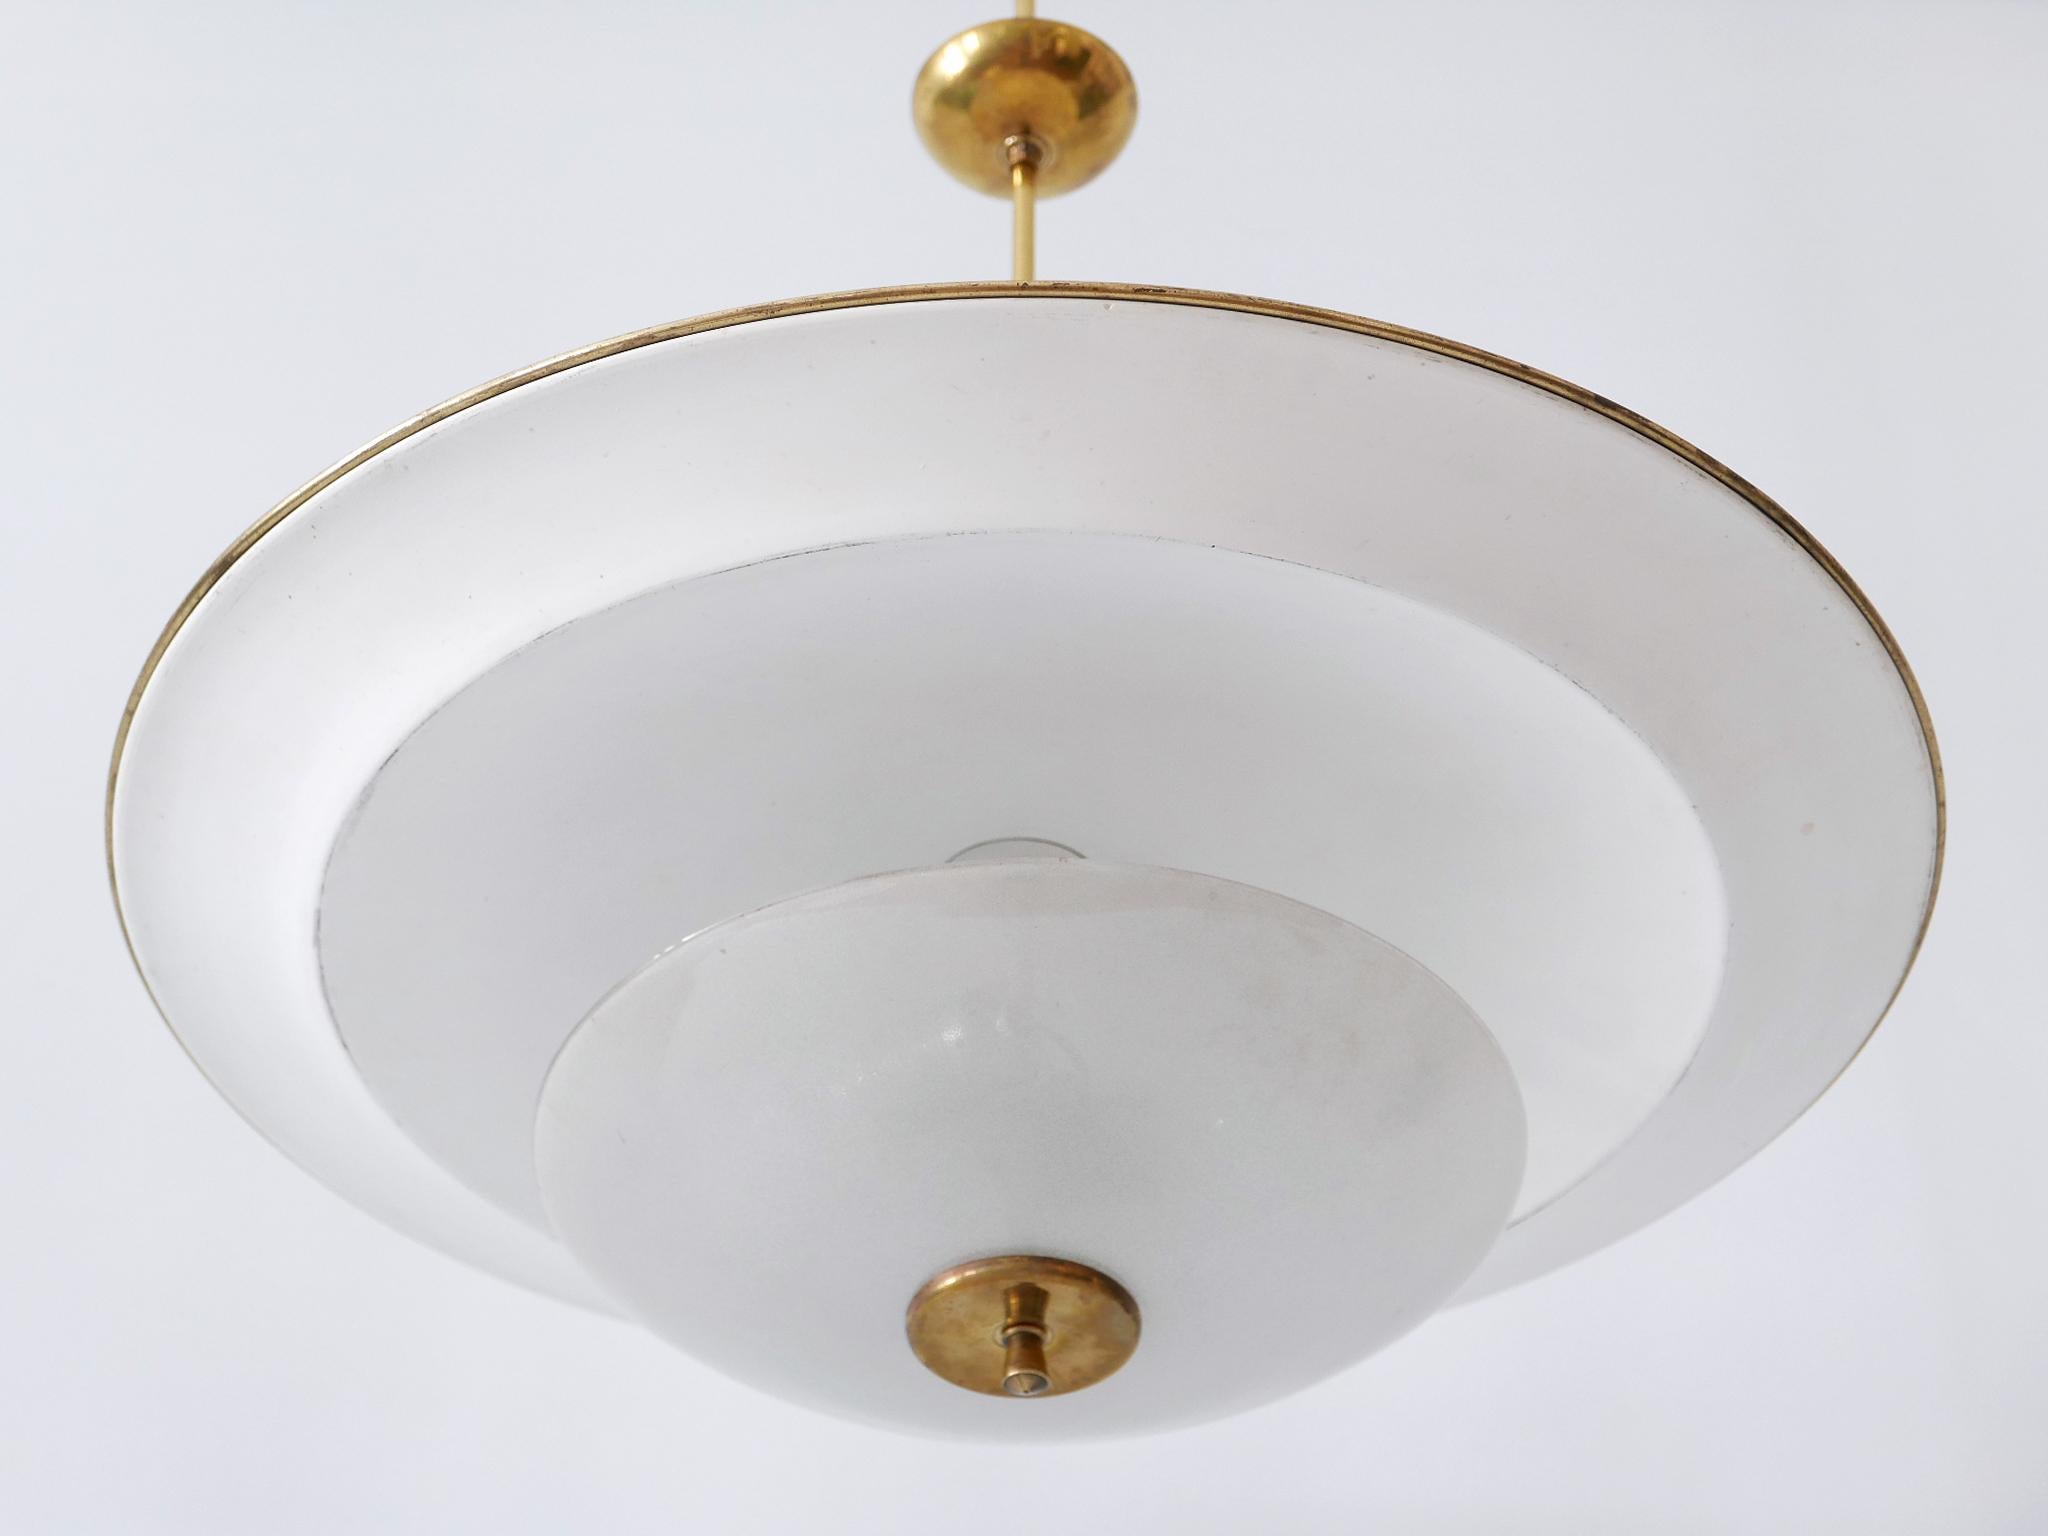 Large, rare and highly decorative Mid-Century Modern 'Ufo' ceiling light or pendant lamp. Designed & manufactured in Germany, 1950s.

Executed in aluminum sheet, textured glass and brass, the pendant lamp needs 2 x E27 / E26 Edison screw fit bulbs.